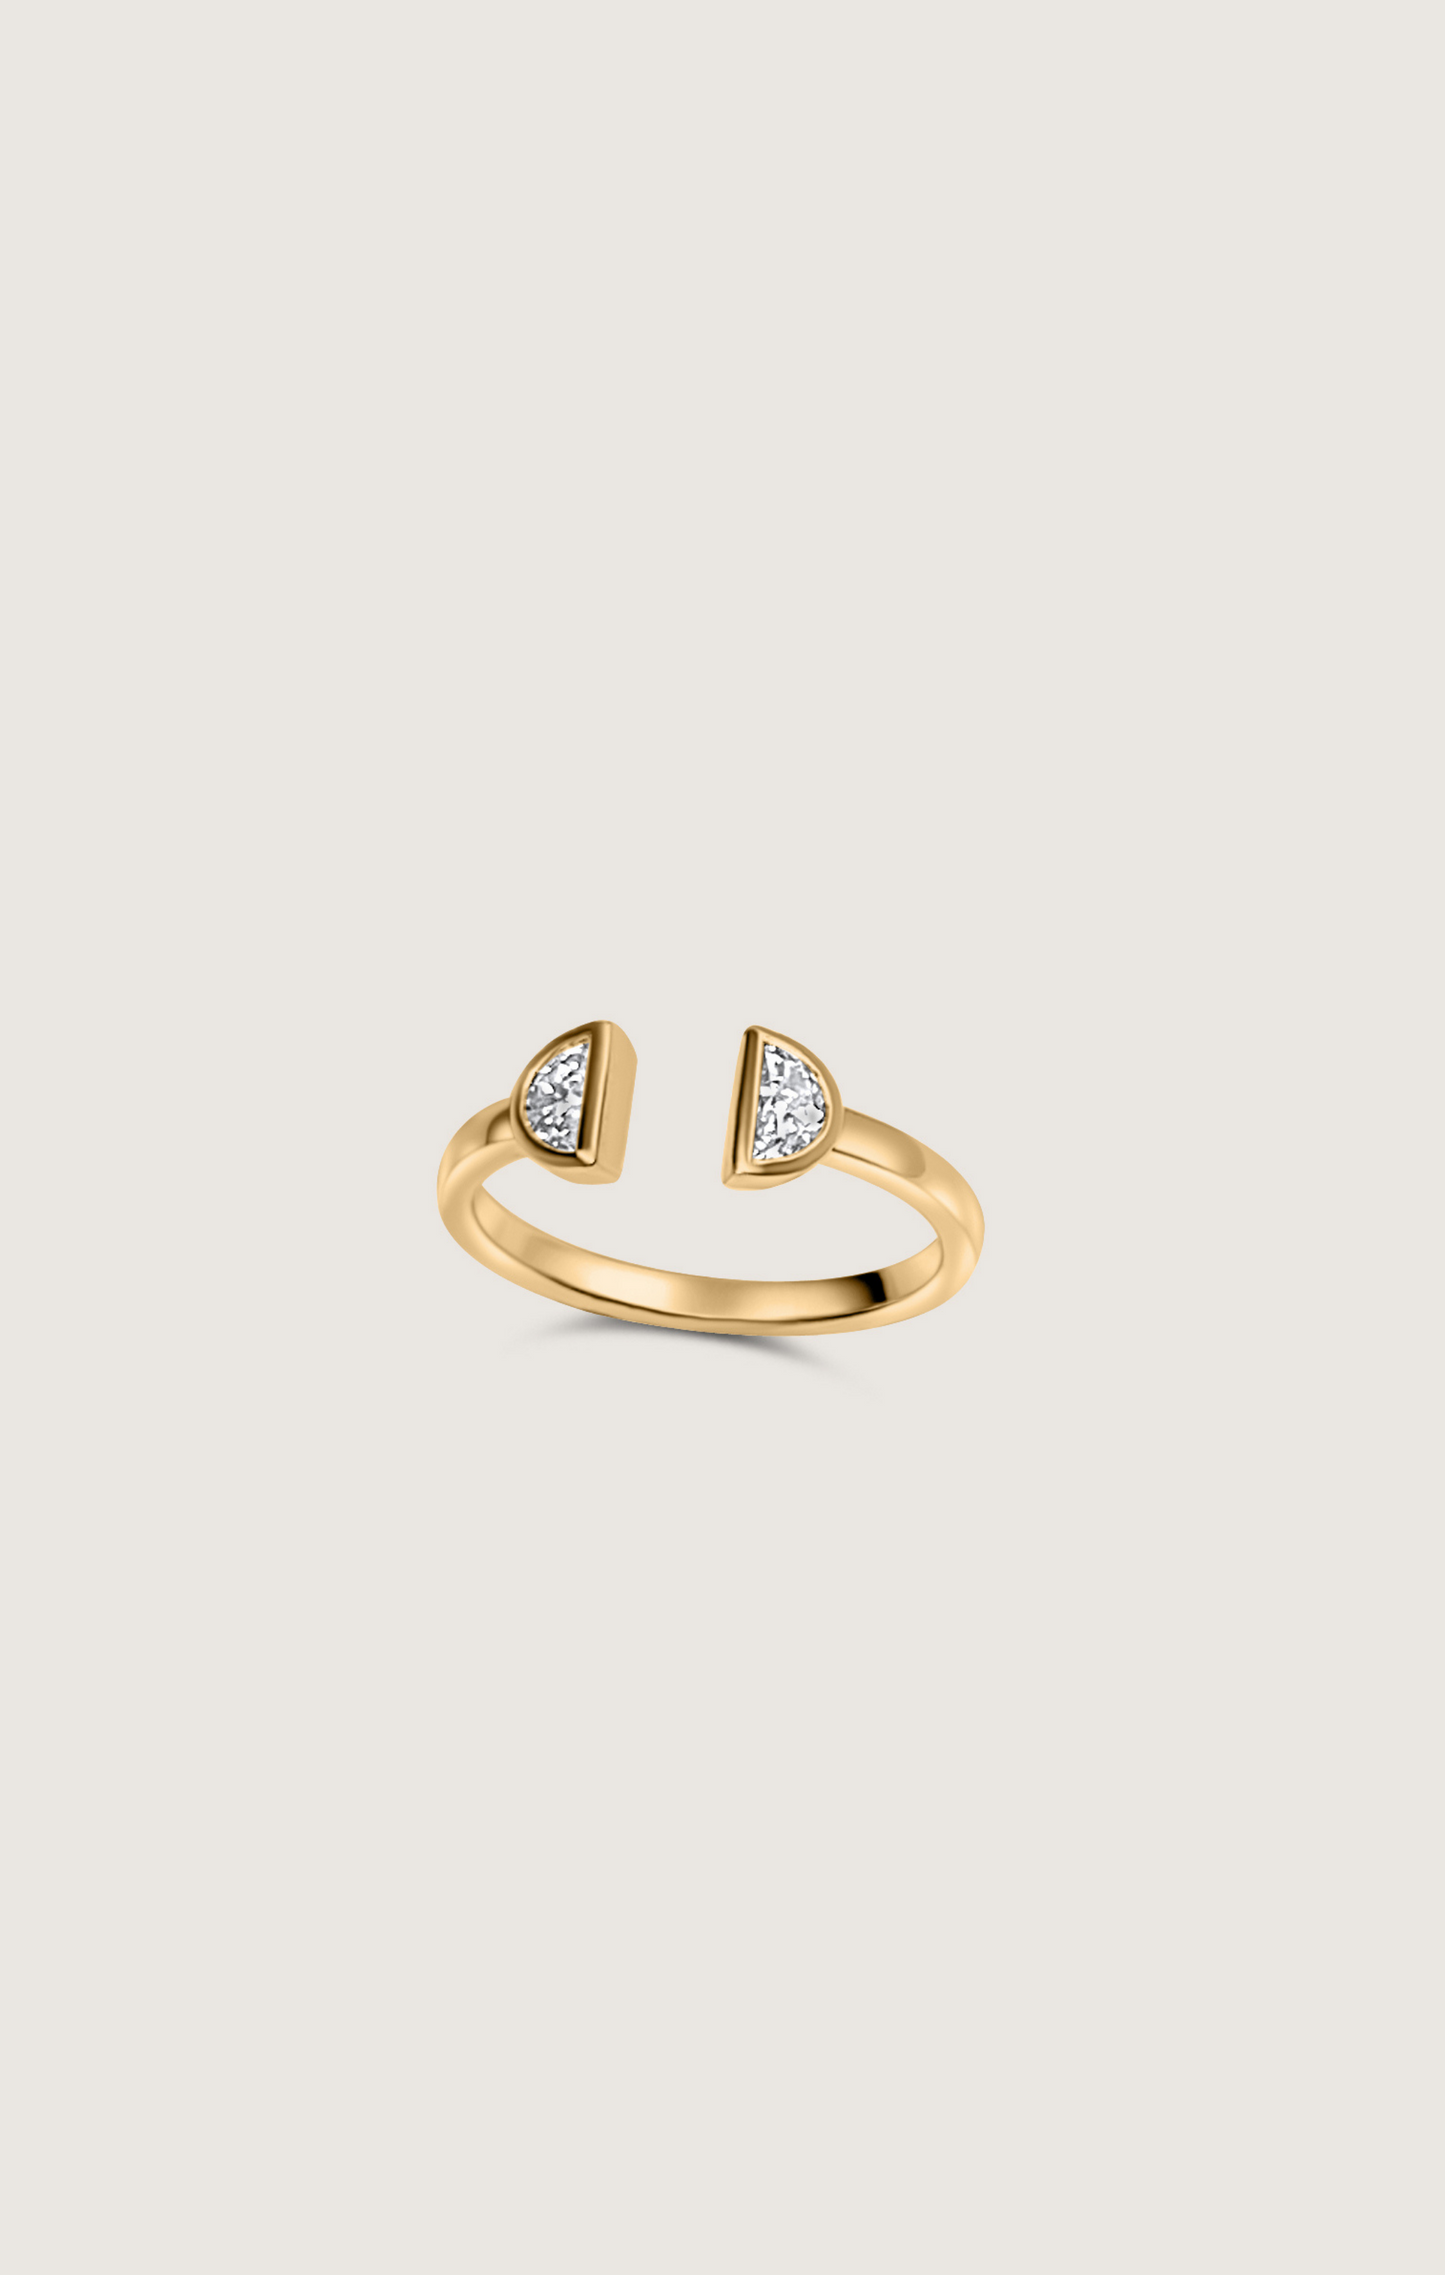 DEMIE - DOUBLE HALF MOON OPEN CUFF RING IN 14k GOLD